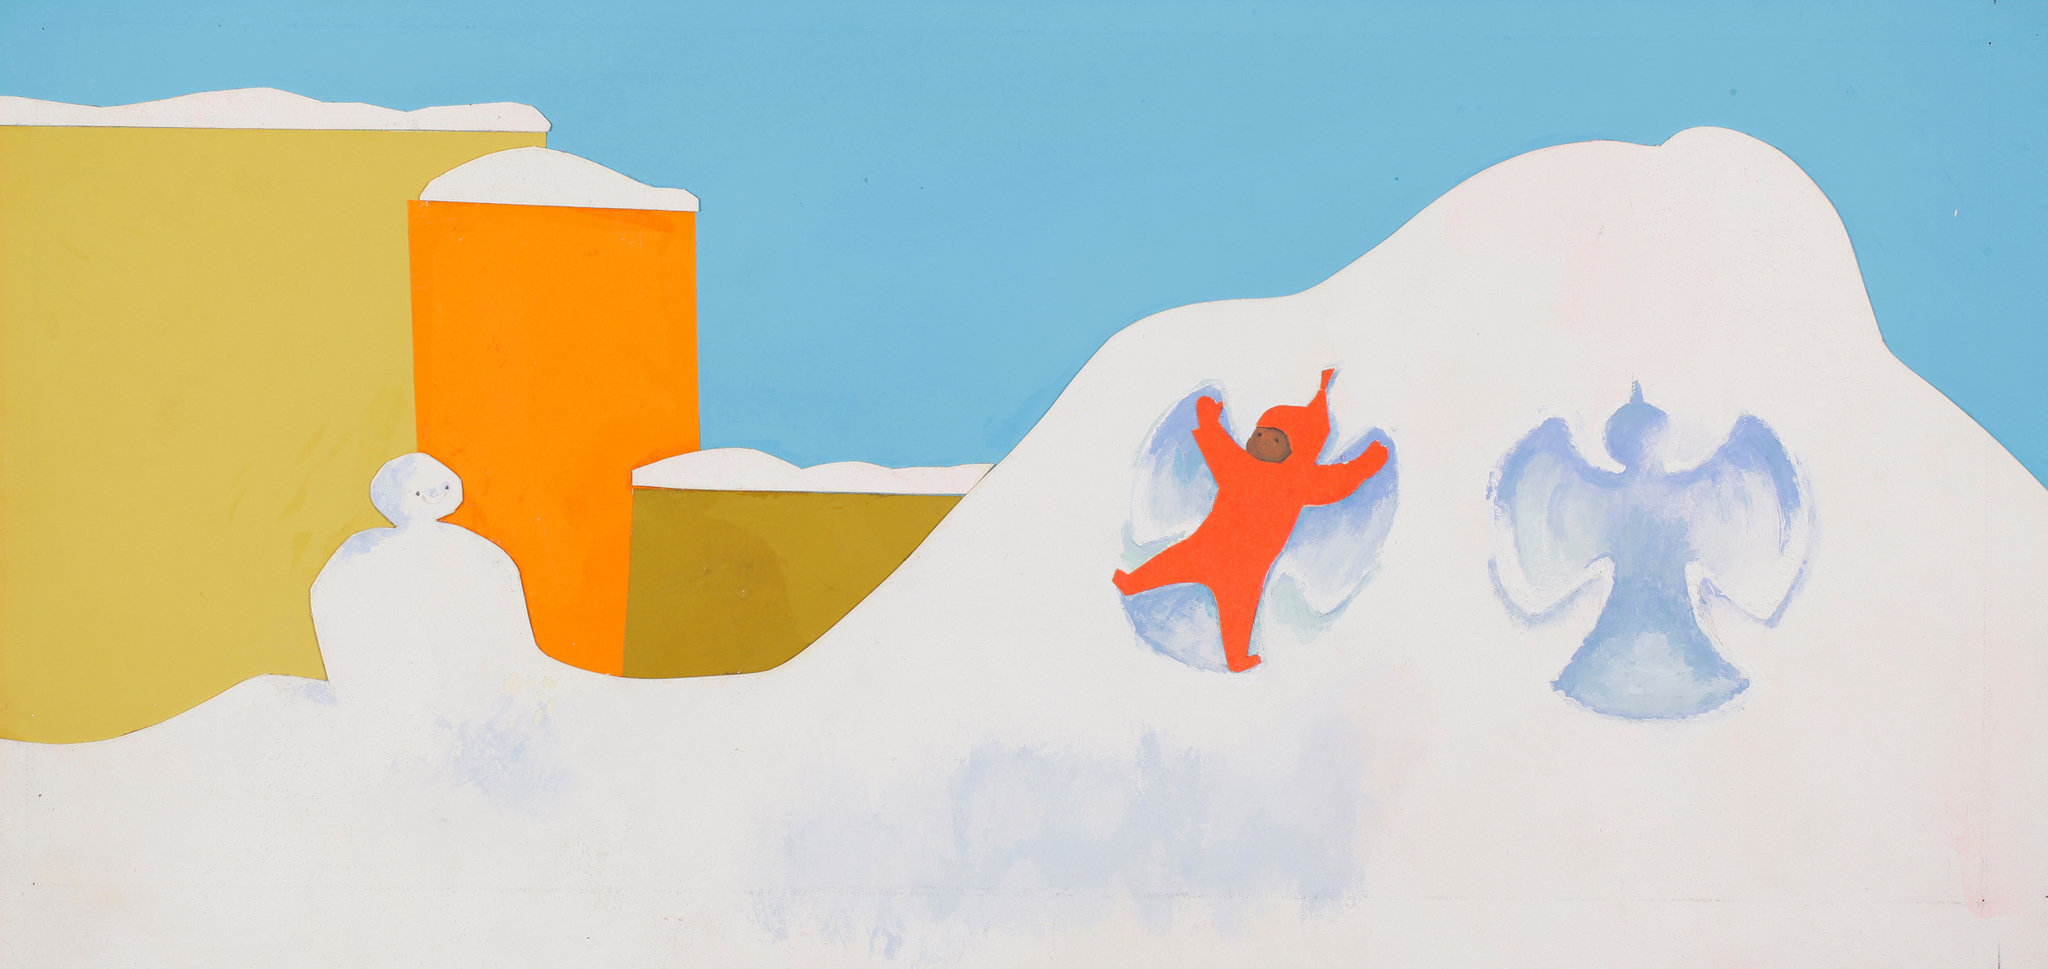 On Color Backgrounds: Ezra Jack Keats' “The Snowy Day”